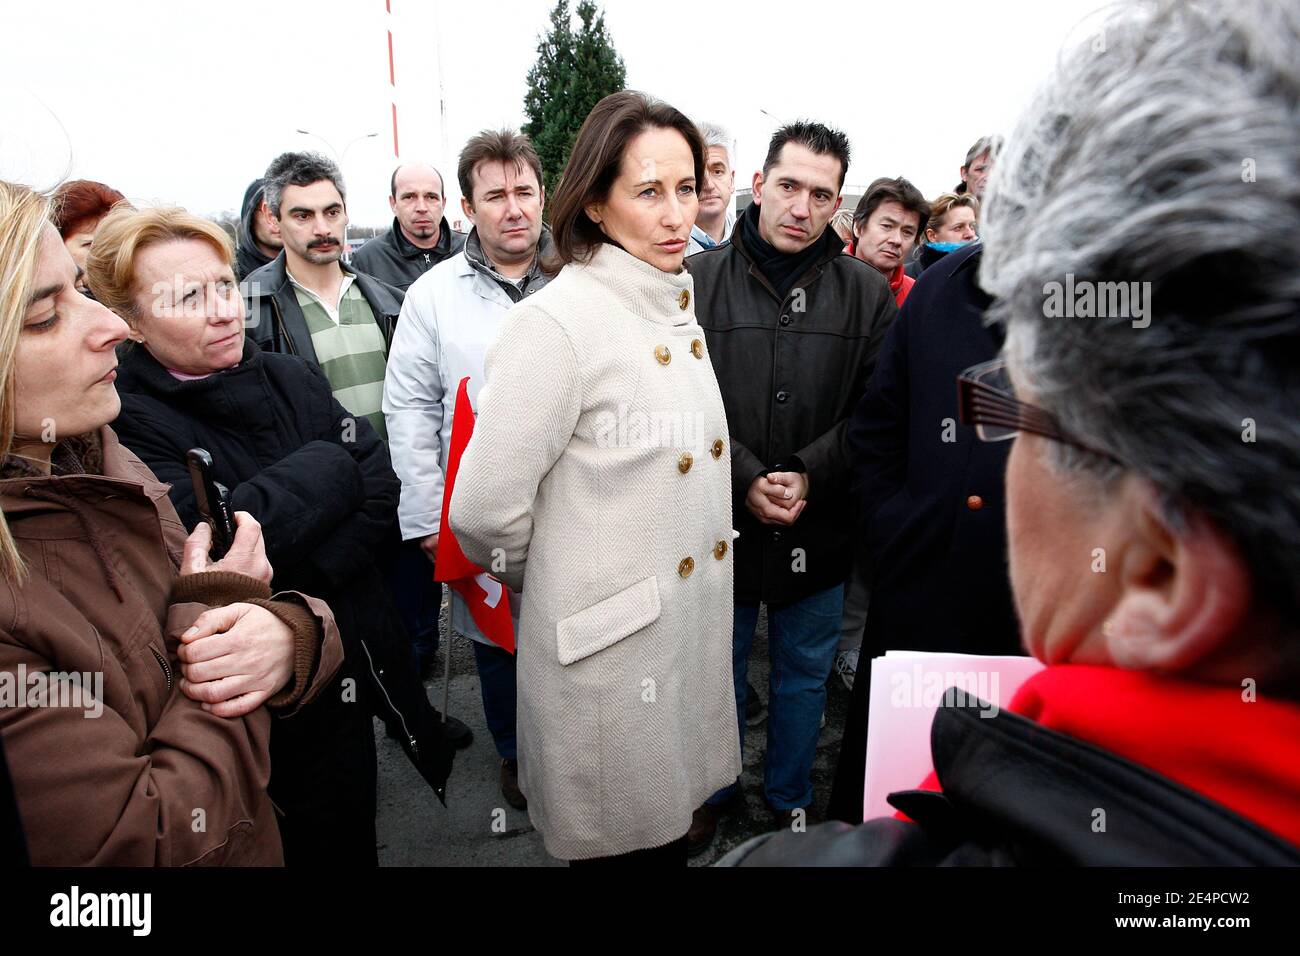 Defeated French Socialist Party Presidential candidate Segolene Royal visits the manufacture of advanced Lithium-Ion batteries for hybrid, plug-in, fuel cell and electric vehicles, in Nersac, France on January 31, 2008. Johnson Controls Saft Advanced Power Solutions announced the official opening of its new lithium-ion automotive battery manufacturing facility in Nersac. Photo by Patrick Bernard/ABACAPRESS.COM Stock Photo